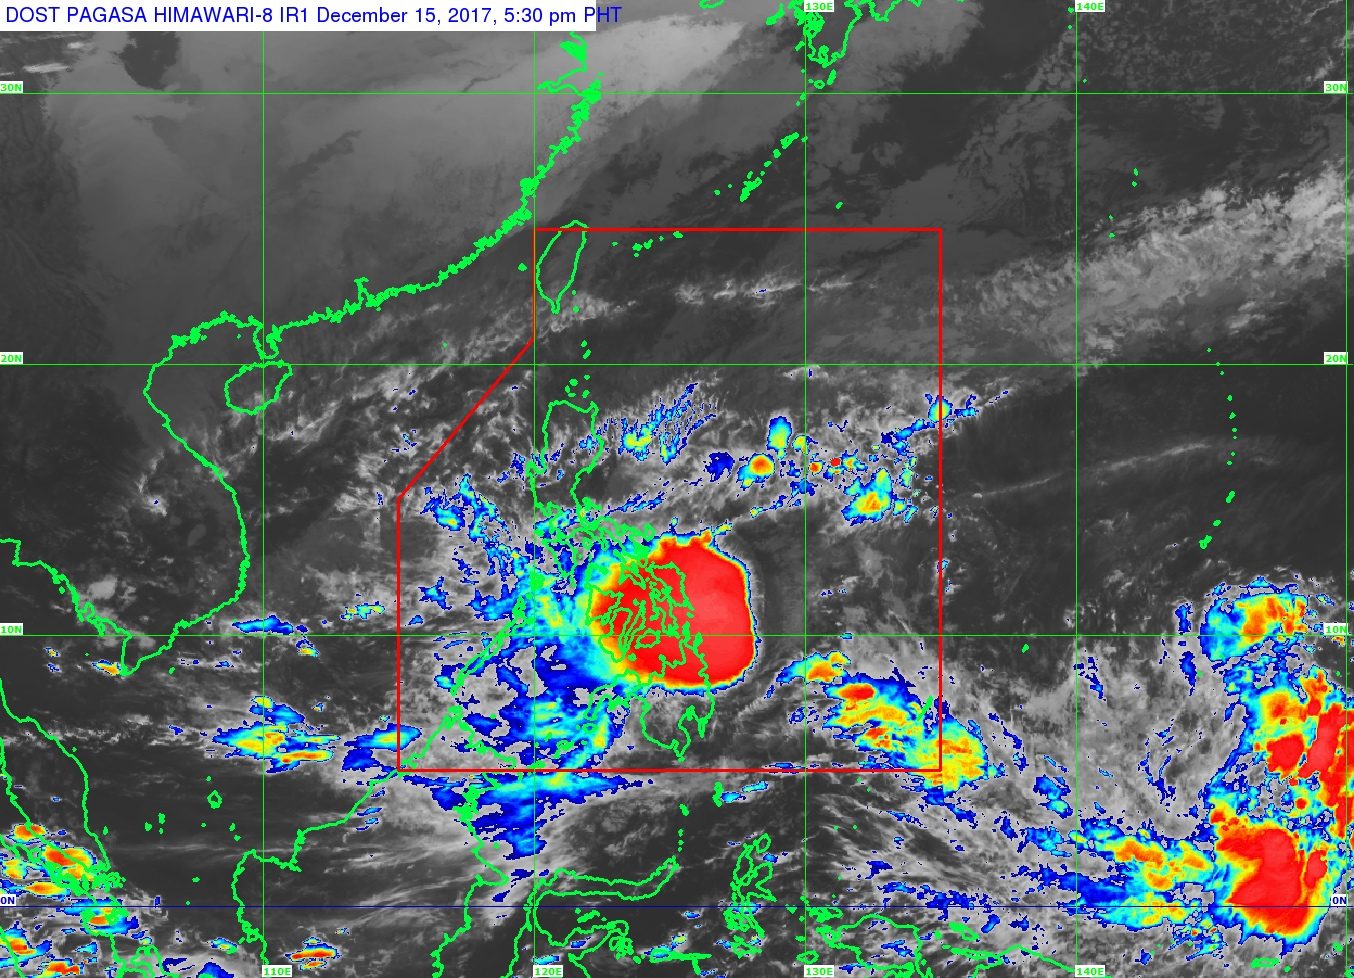 Urduja dumps nearly 2 months’ worth of rain in Guiuan in 1 day